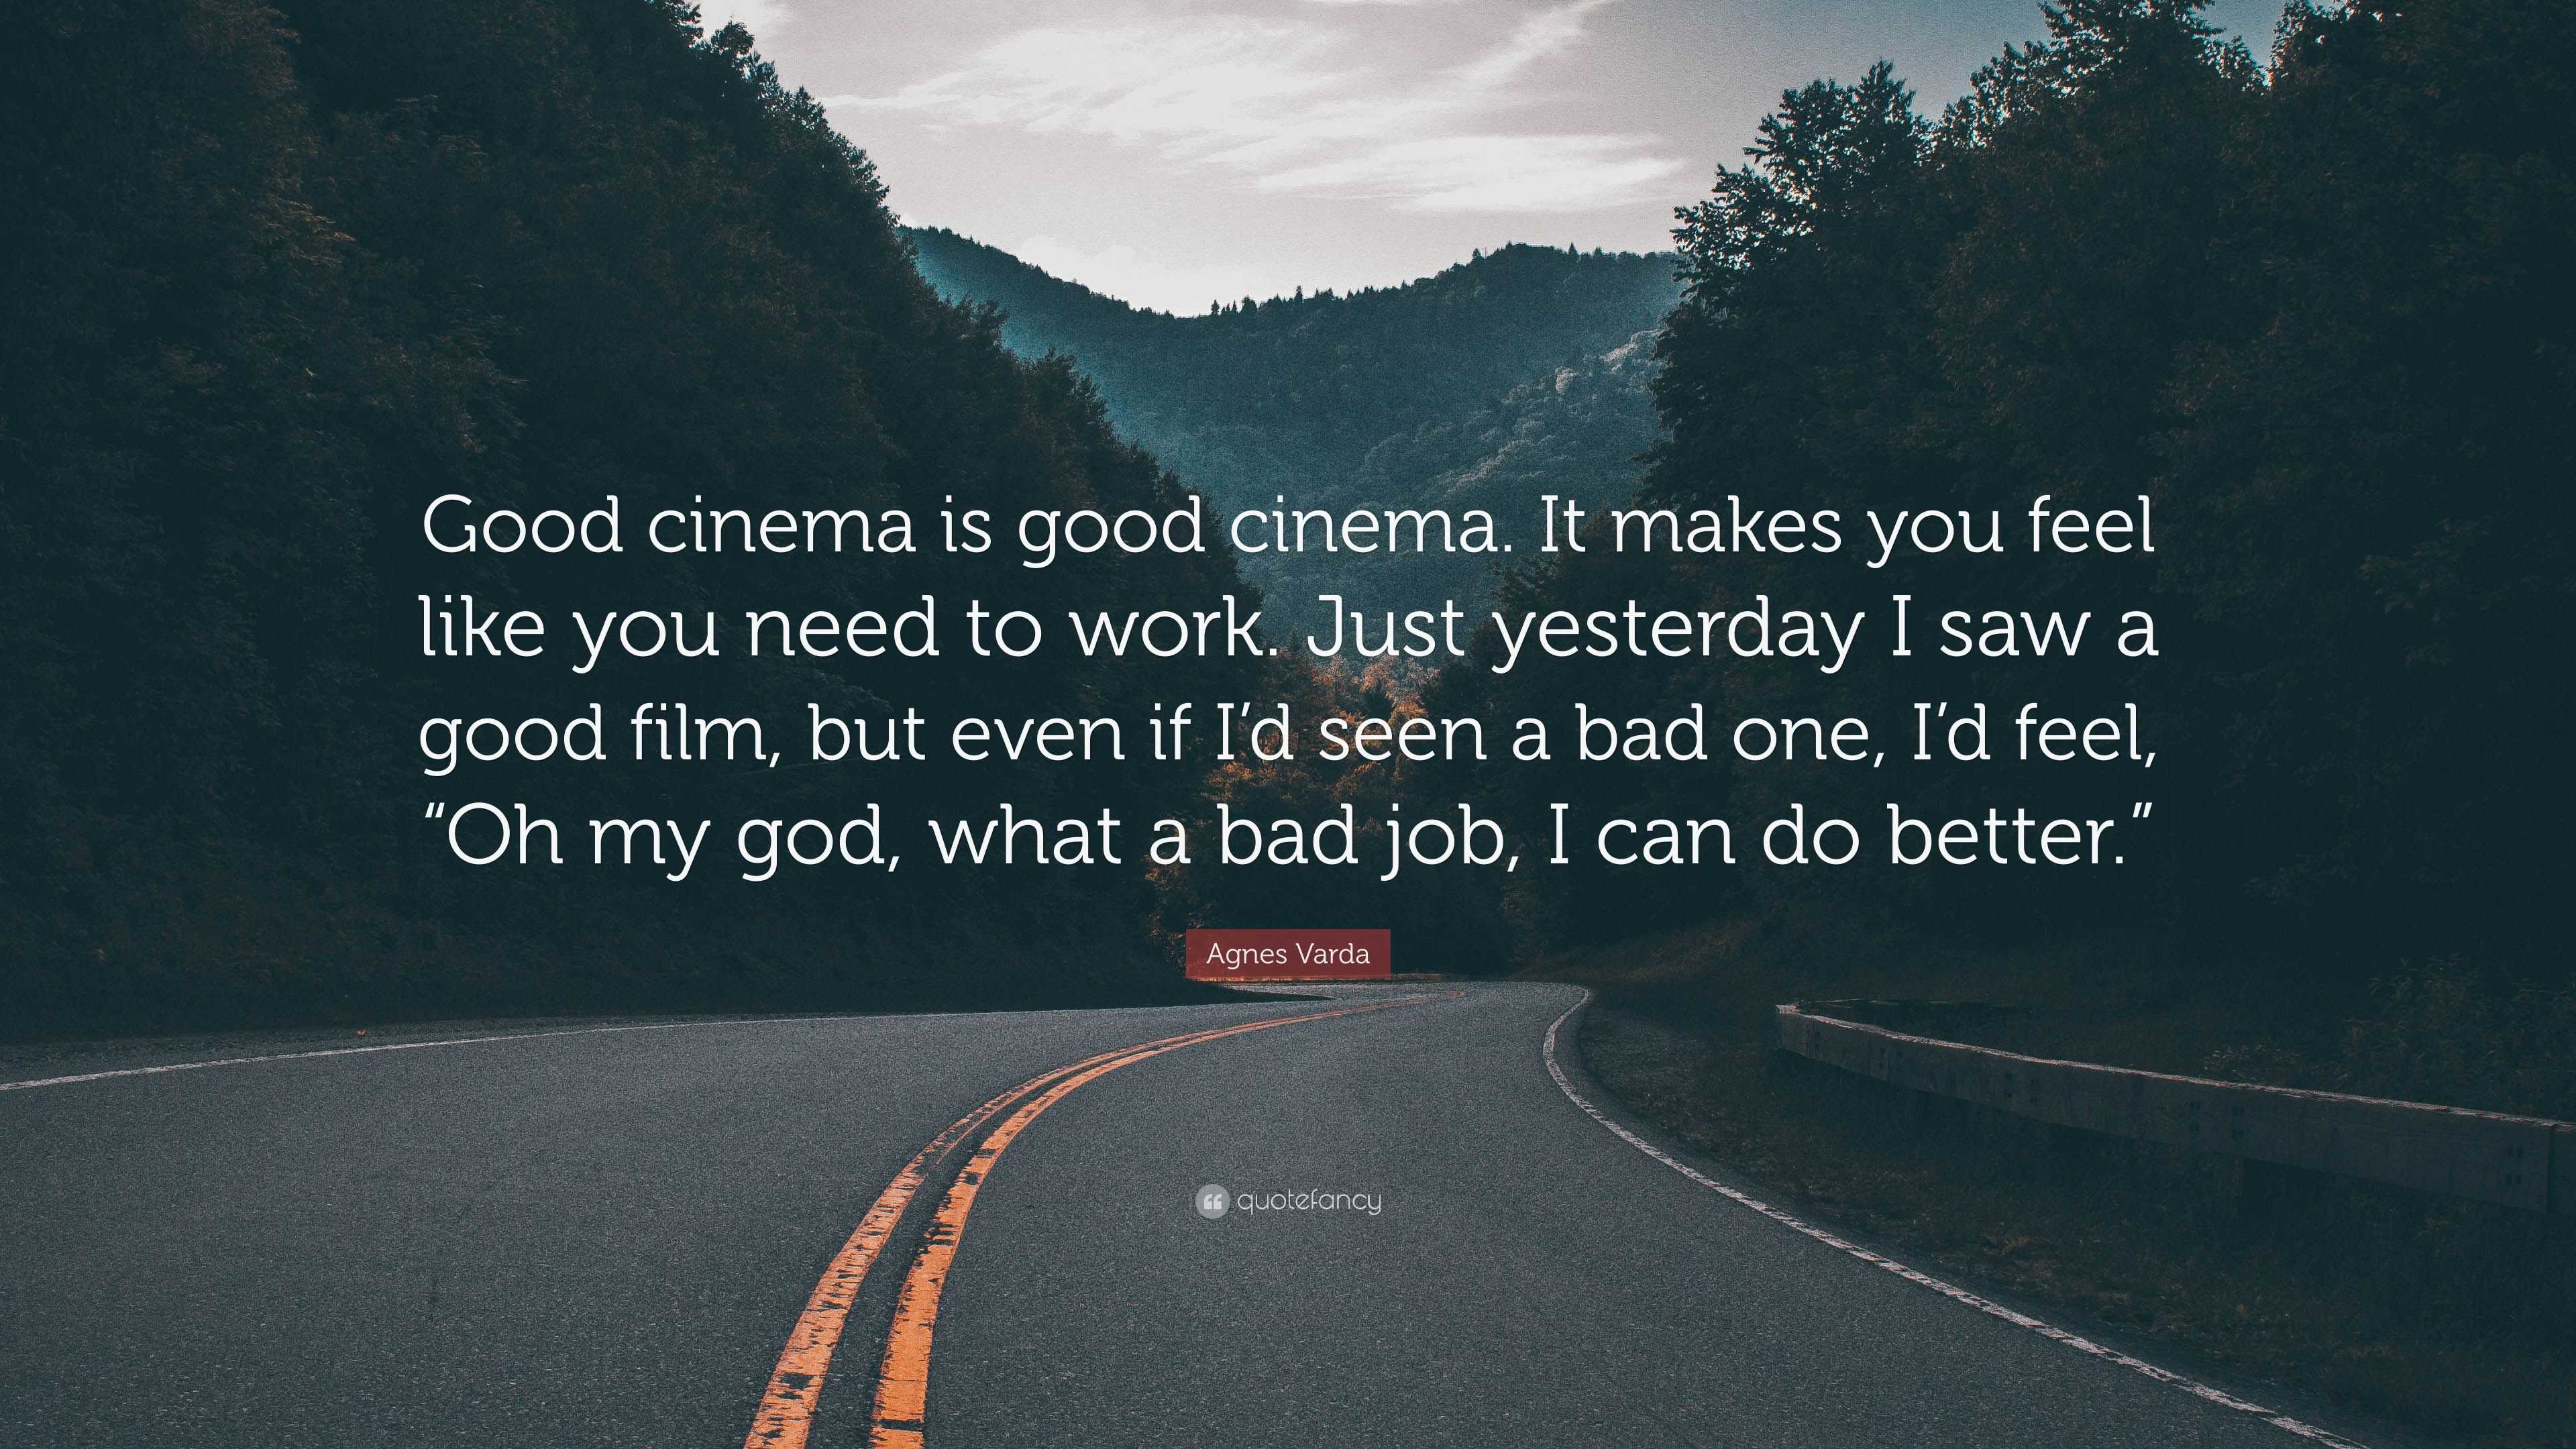 This Is Why You Should Appreciate the Cinematic Filmmaking of